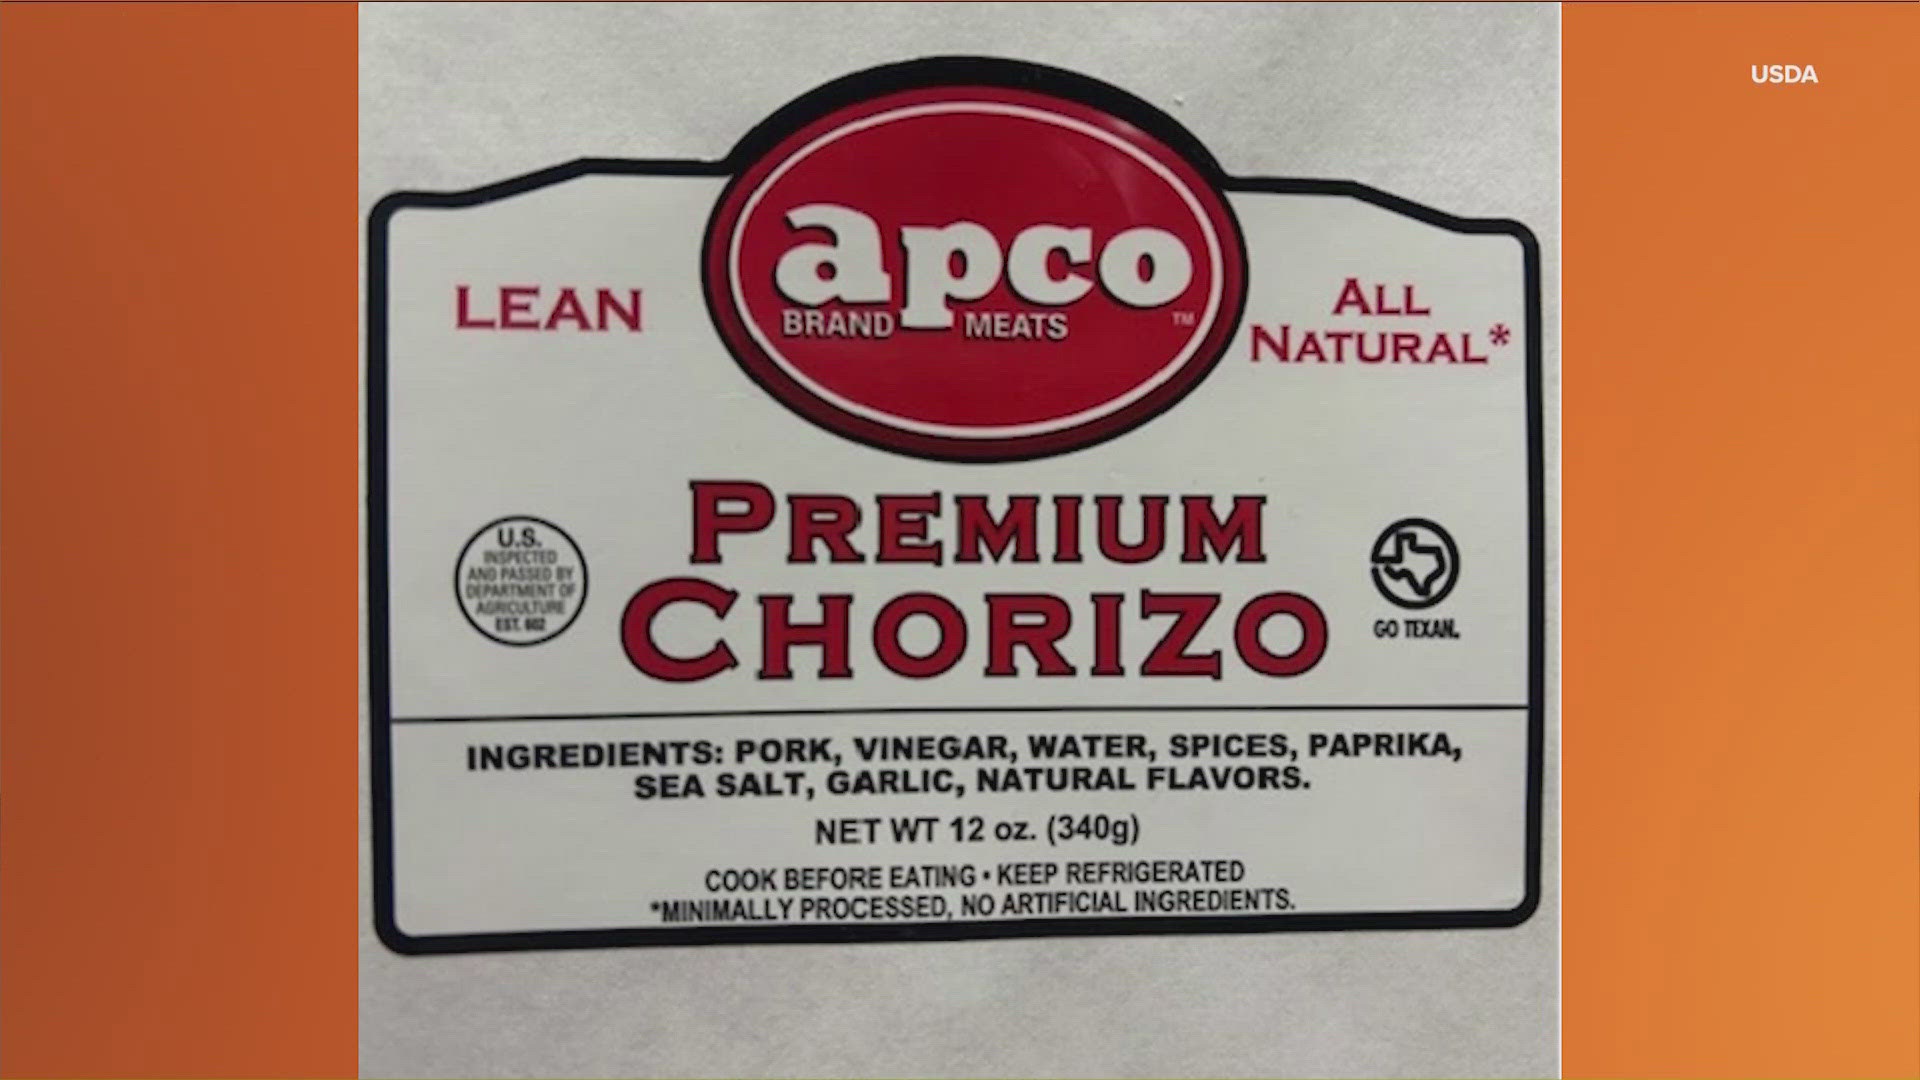 The USDA stated some of the raw chorizo products might contain plastic and metal.